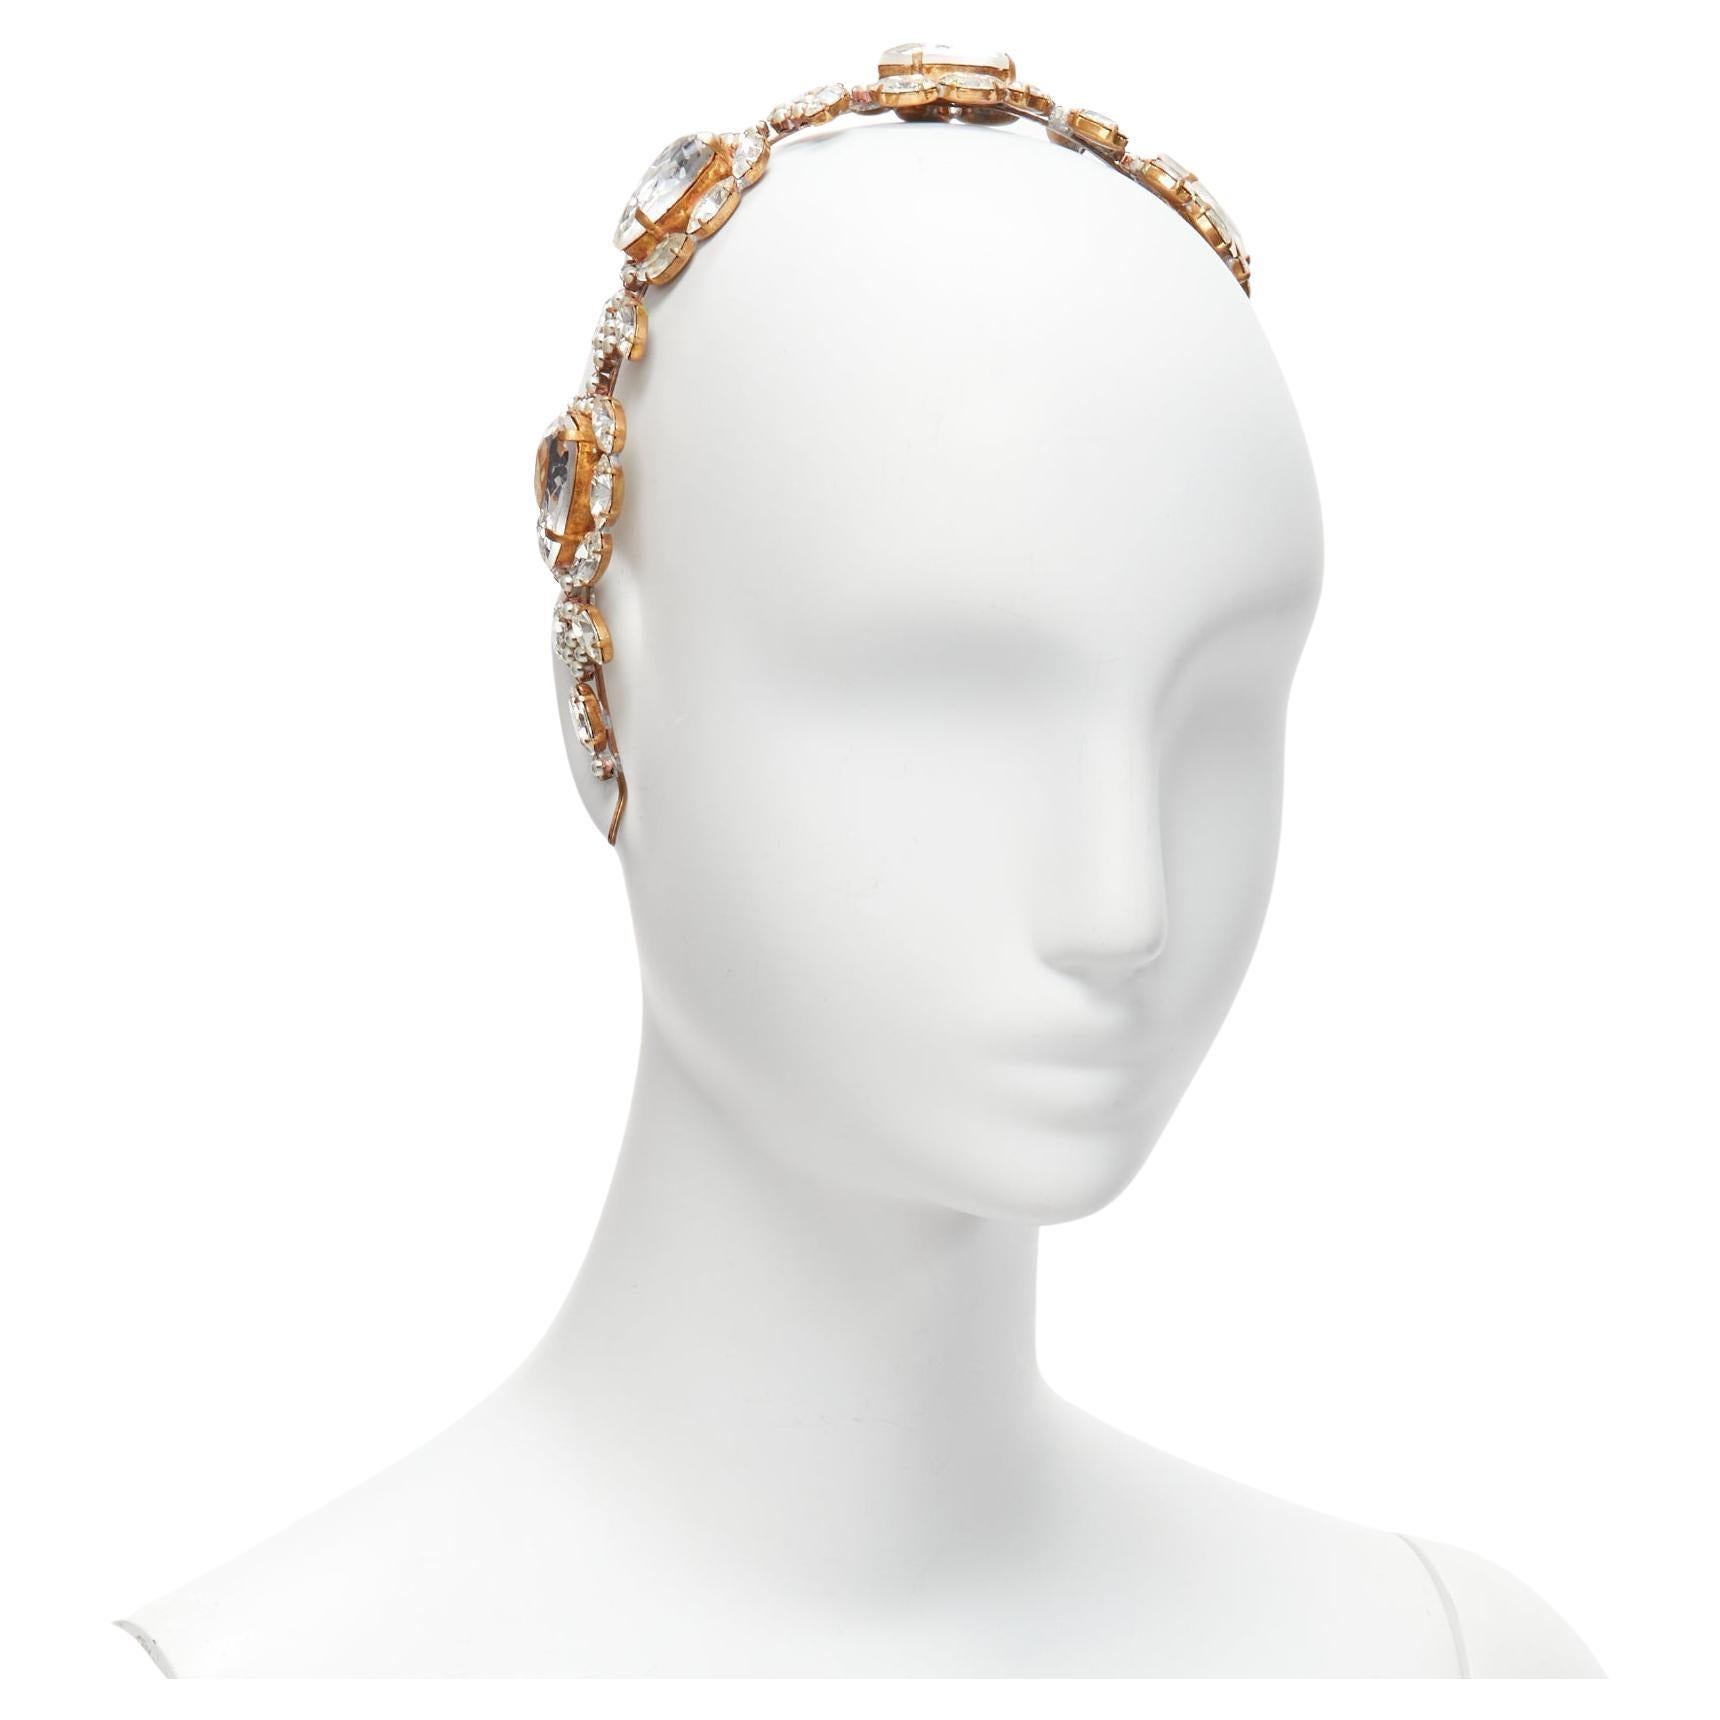 rare MEADHAM KIRCHHOFF Lilien Czech Runway crystals pearl bronze alice headband For Sale